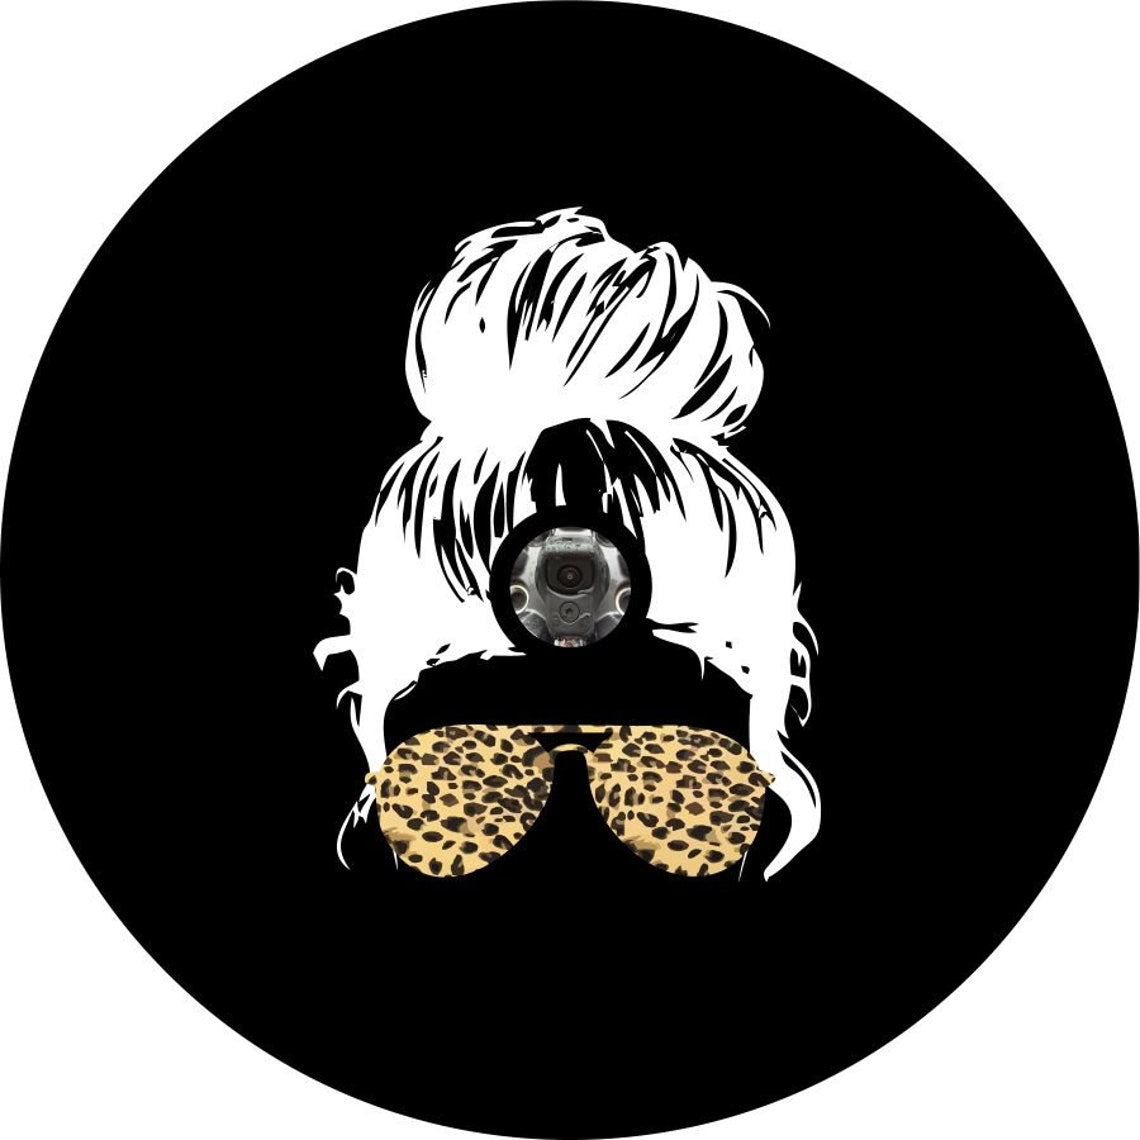 Top knot messy bun girl wearing cheetah leopard print sunglasses spare tire cover for Jeep, Bronco, RV, camper, and more. Spare tire cover design made for black vinyl with back up camera hole